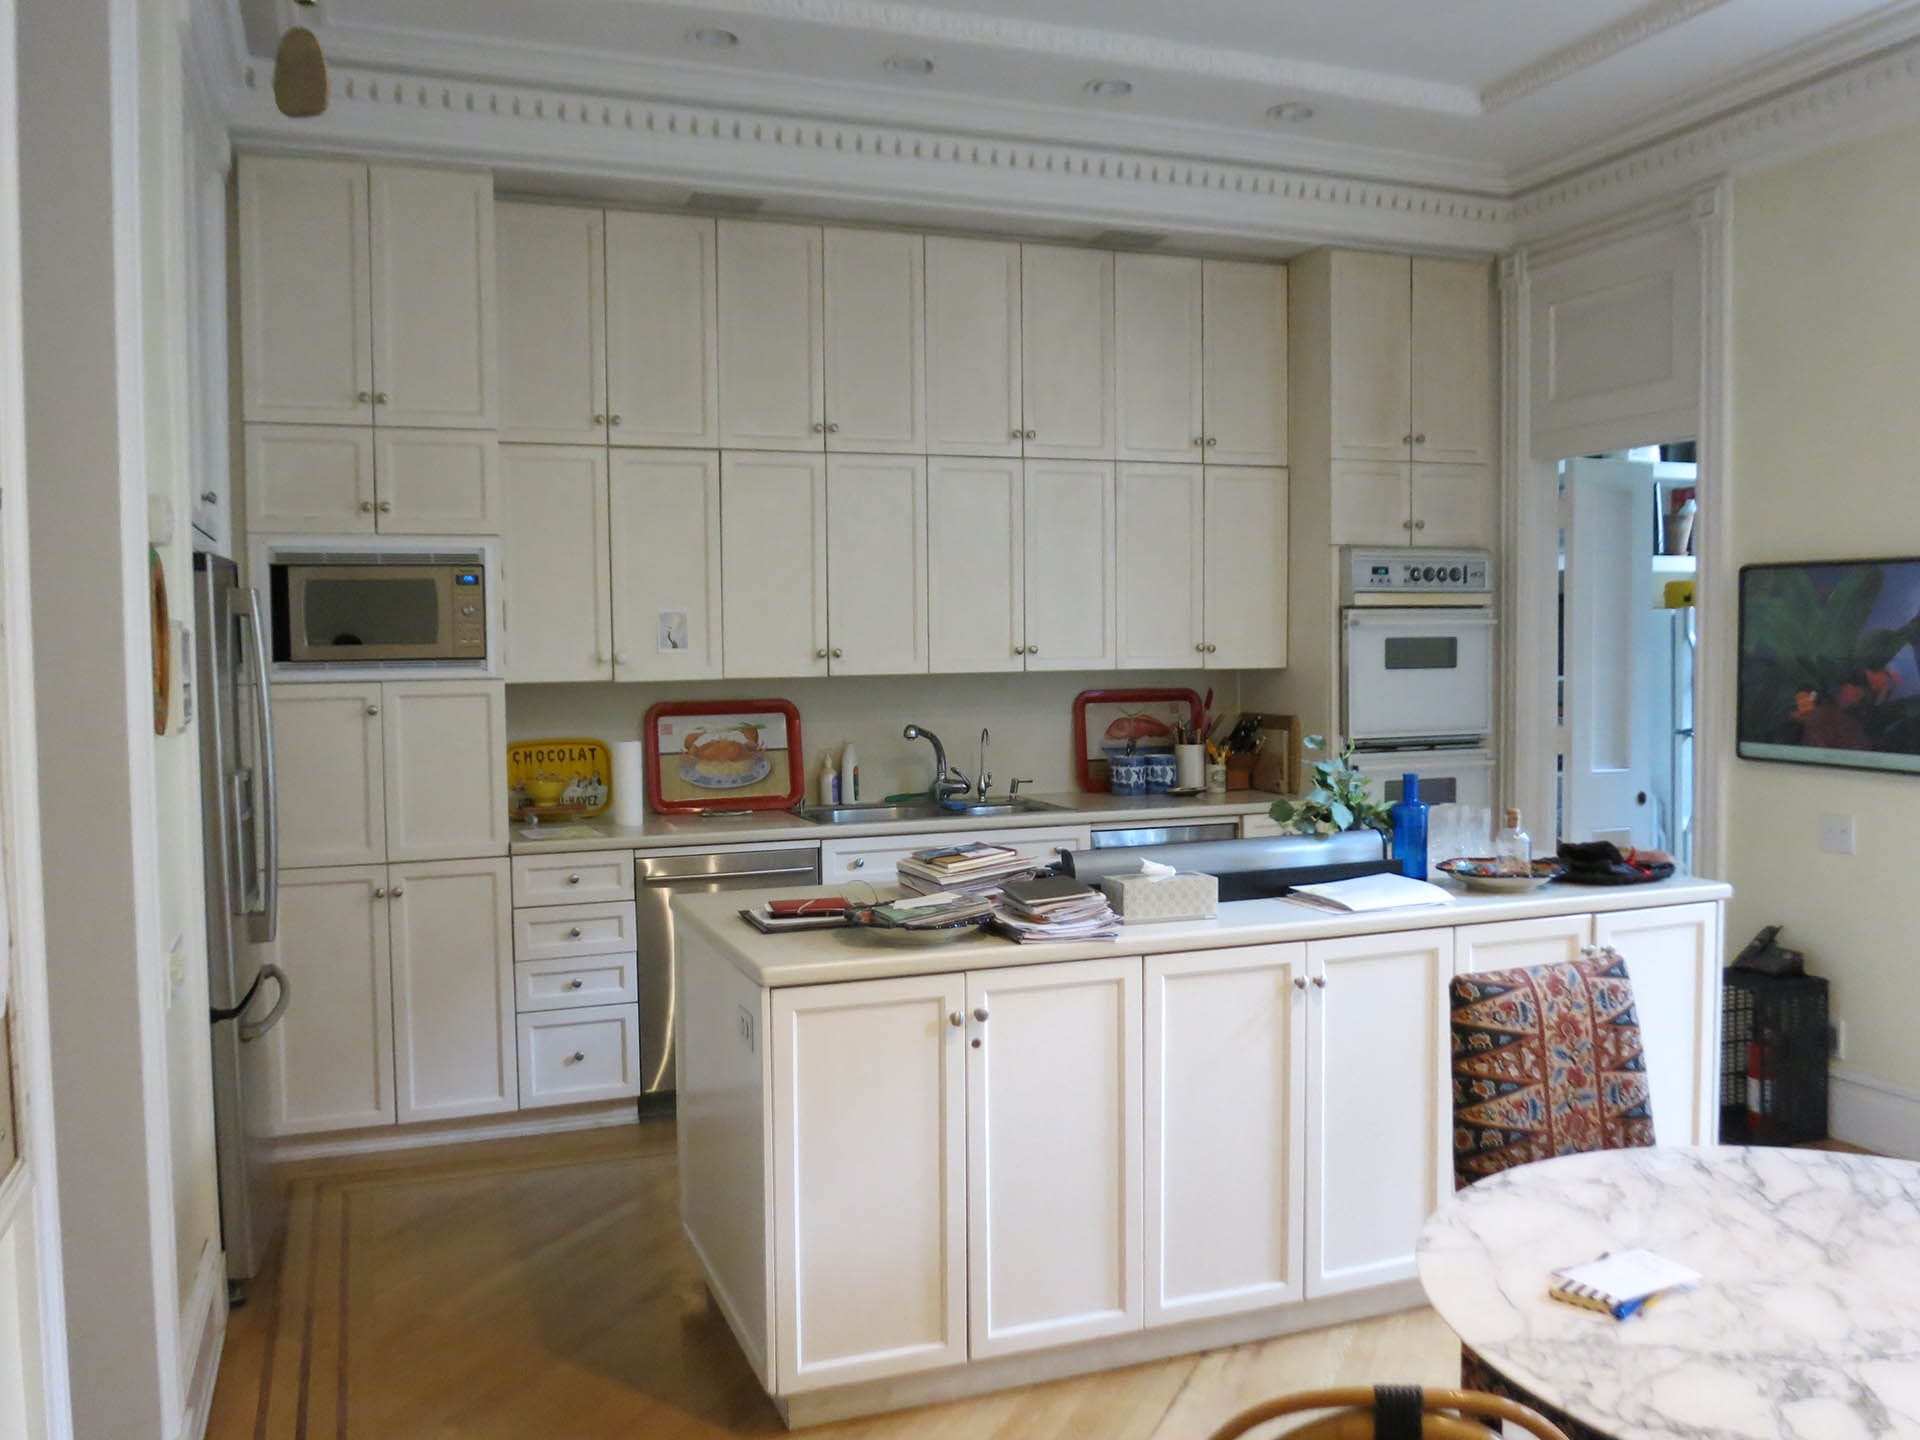 All white kitchen with shaker-style millwork on the cabinets, walls, and island.